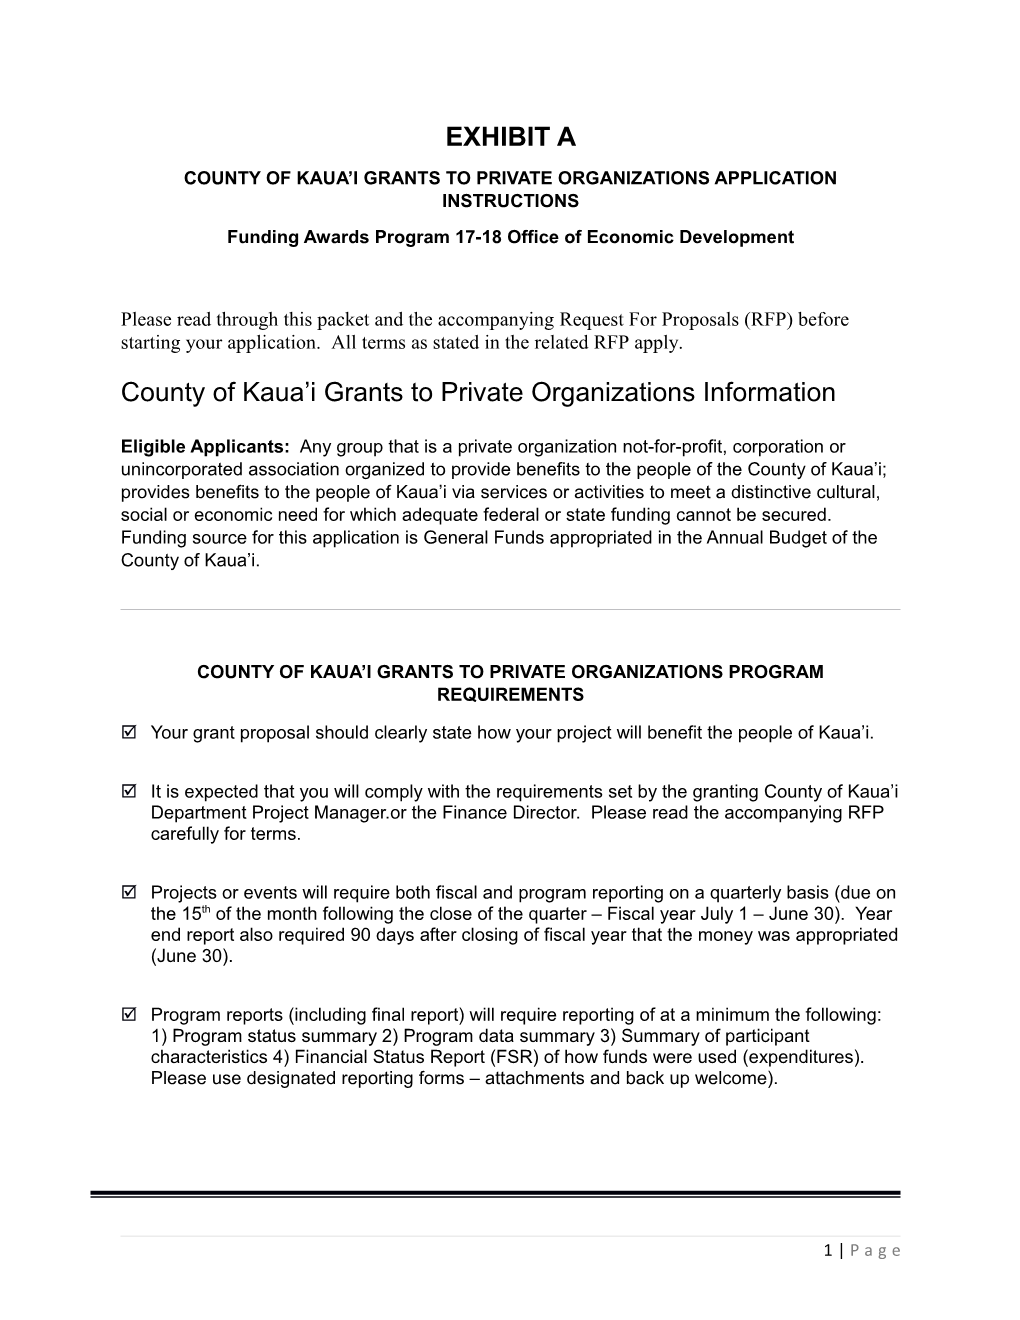 County of Kaua I Grants to Private Organizations Application Instructions